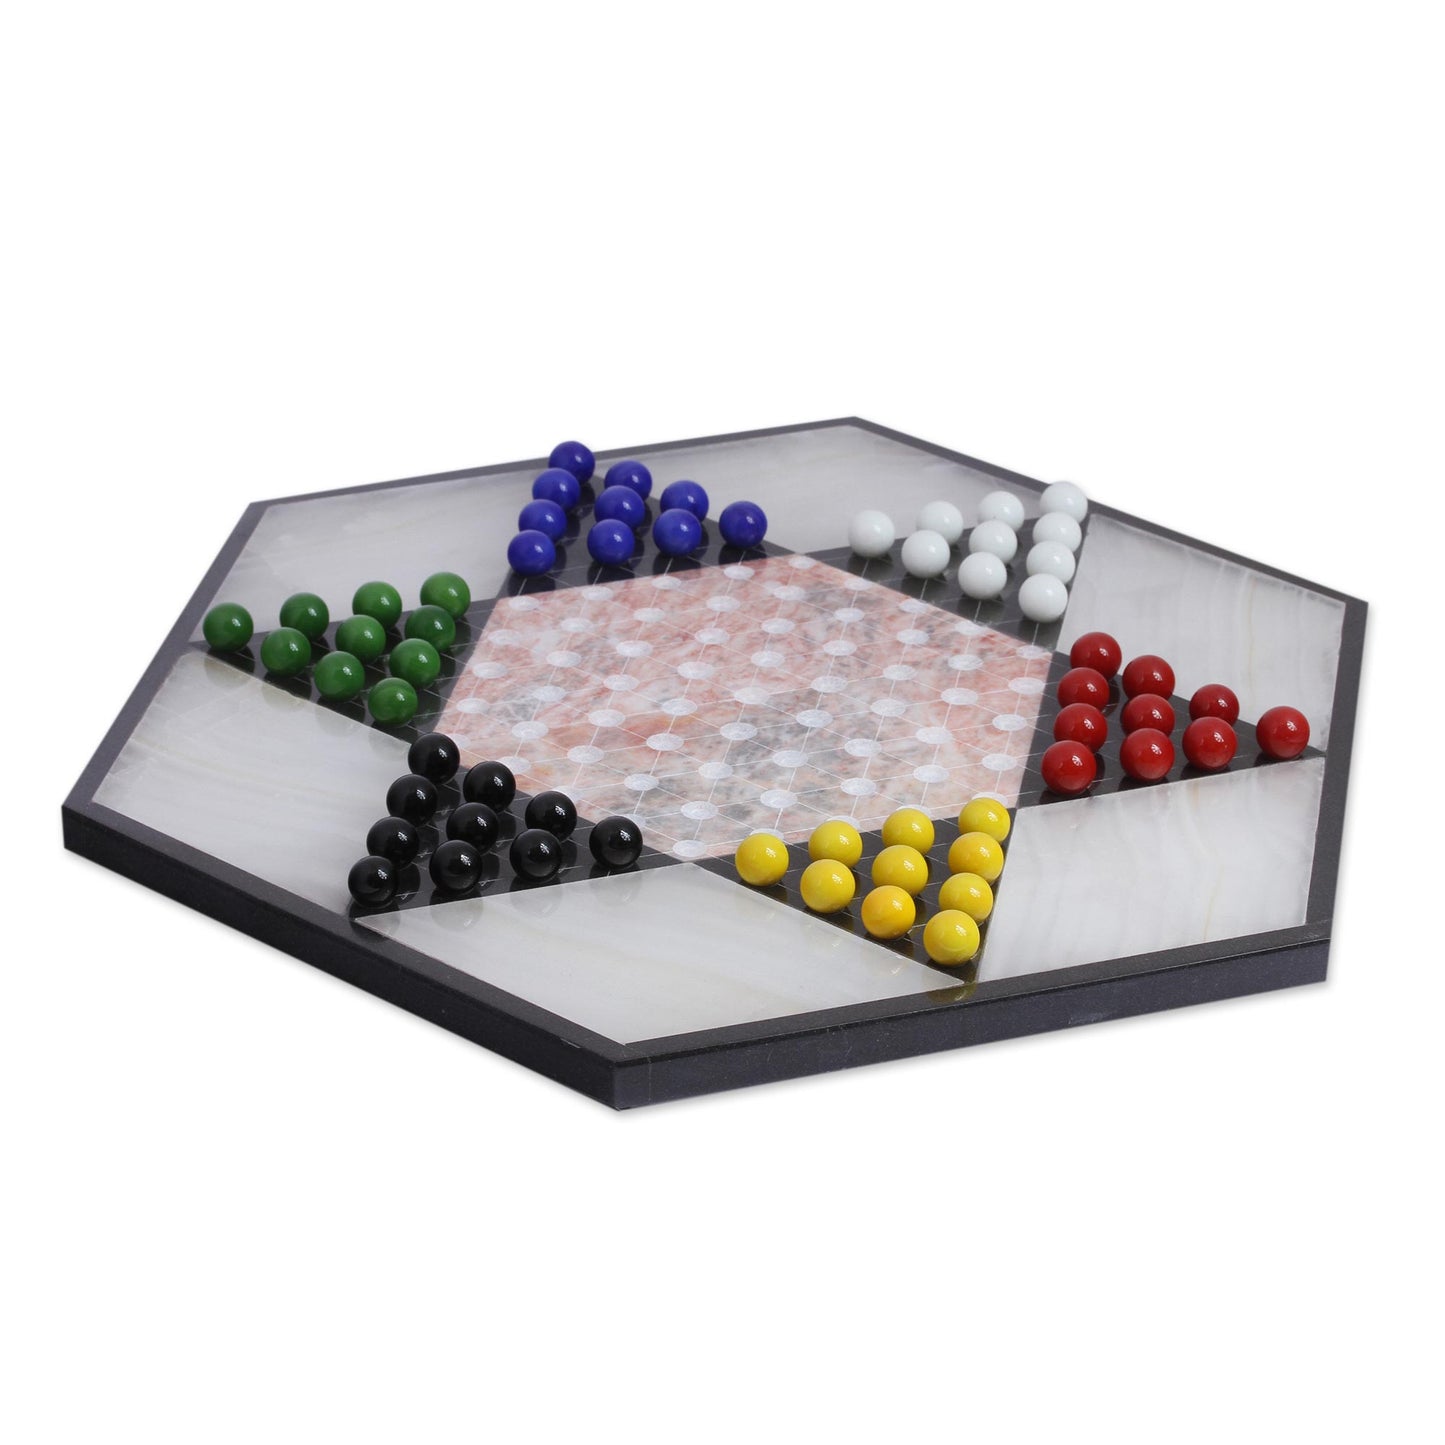 Colorful Contrast Hand Crafted Marble Chinese Checker Game Set